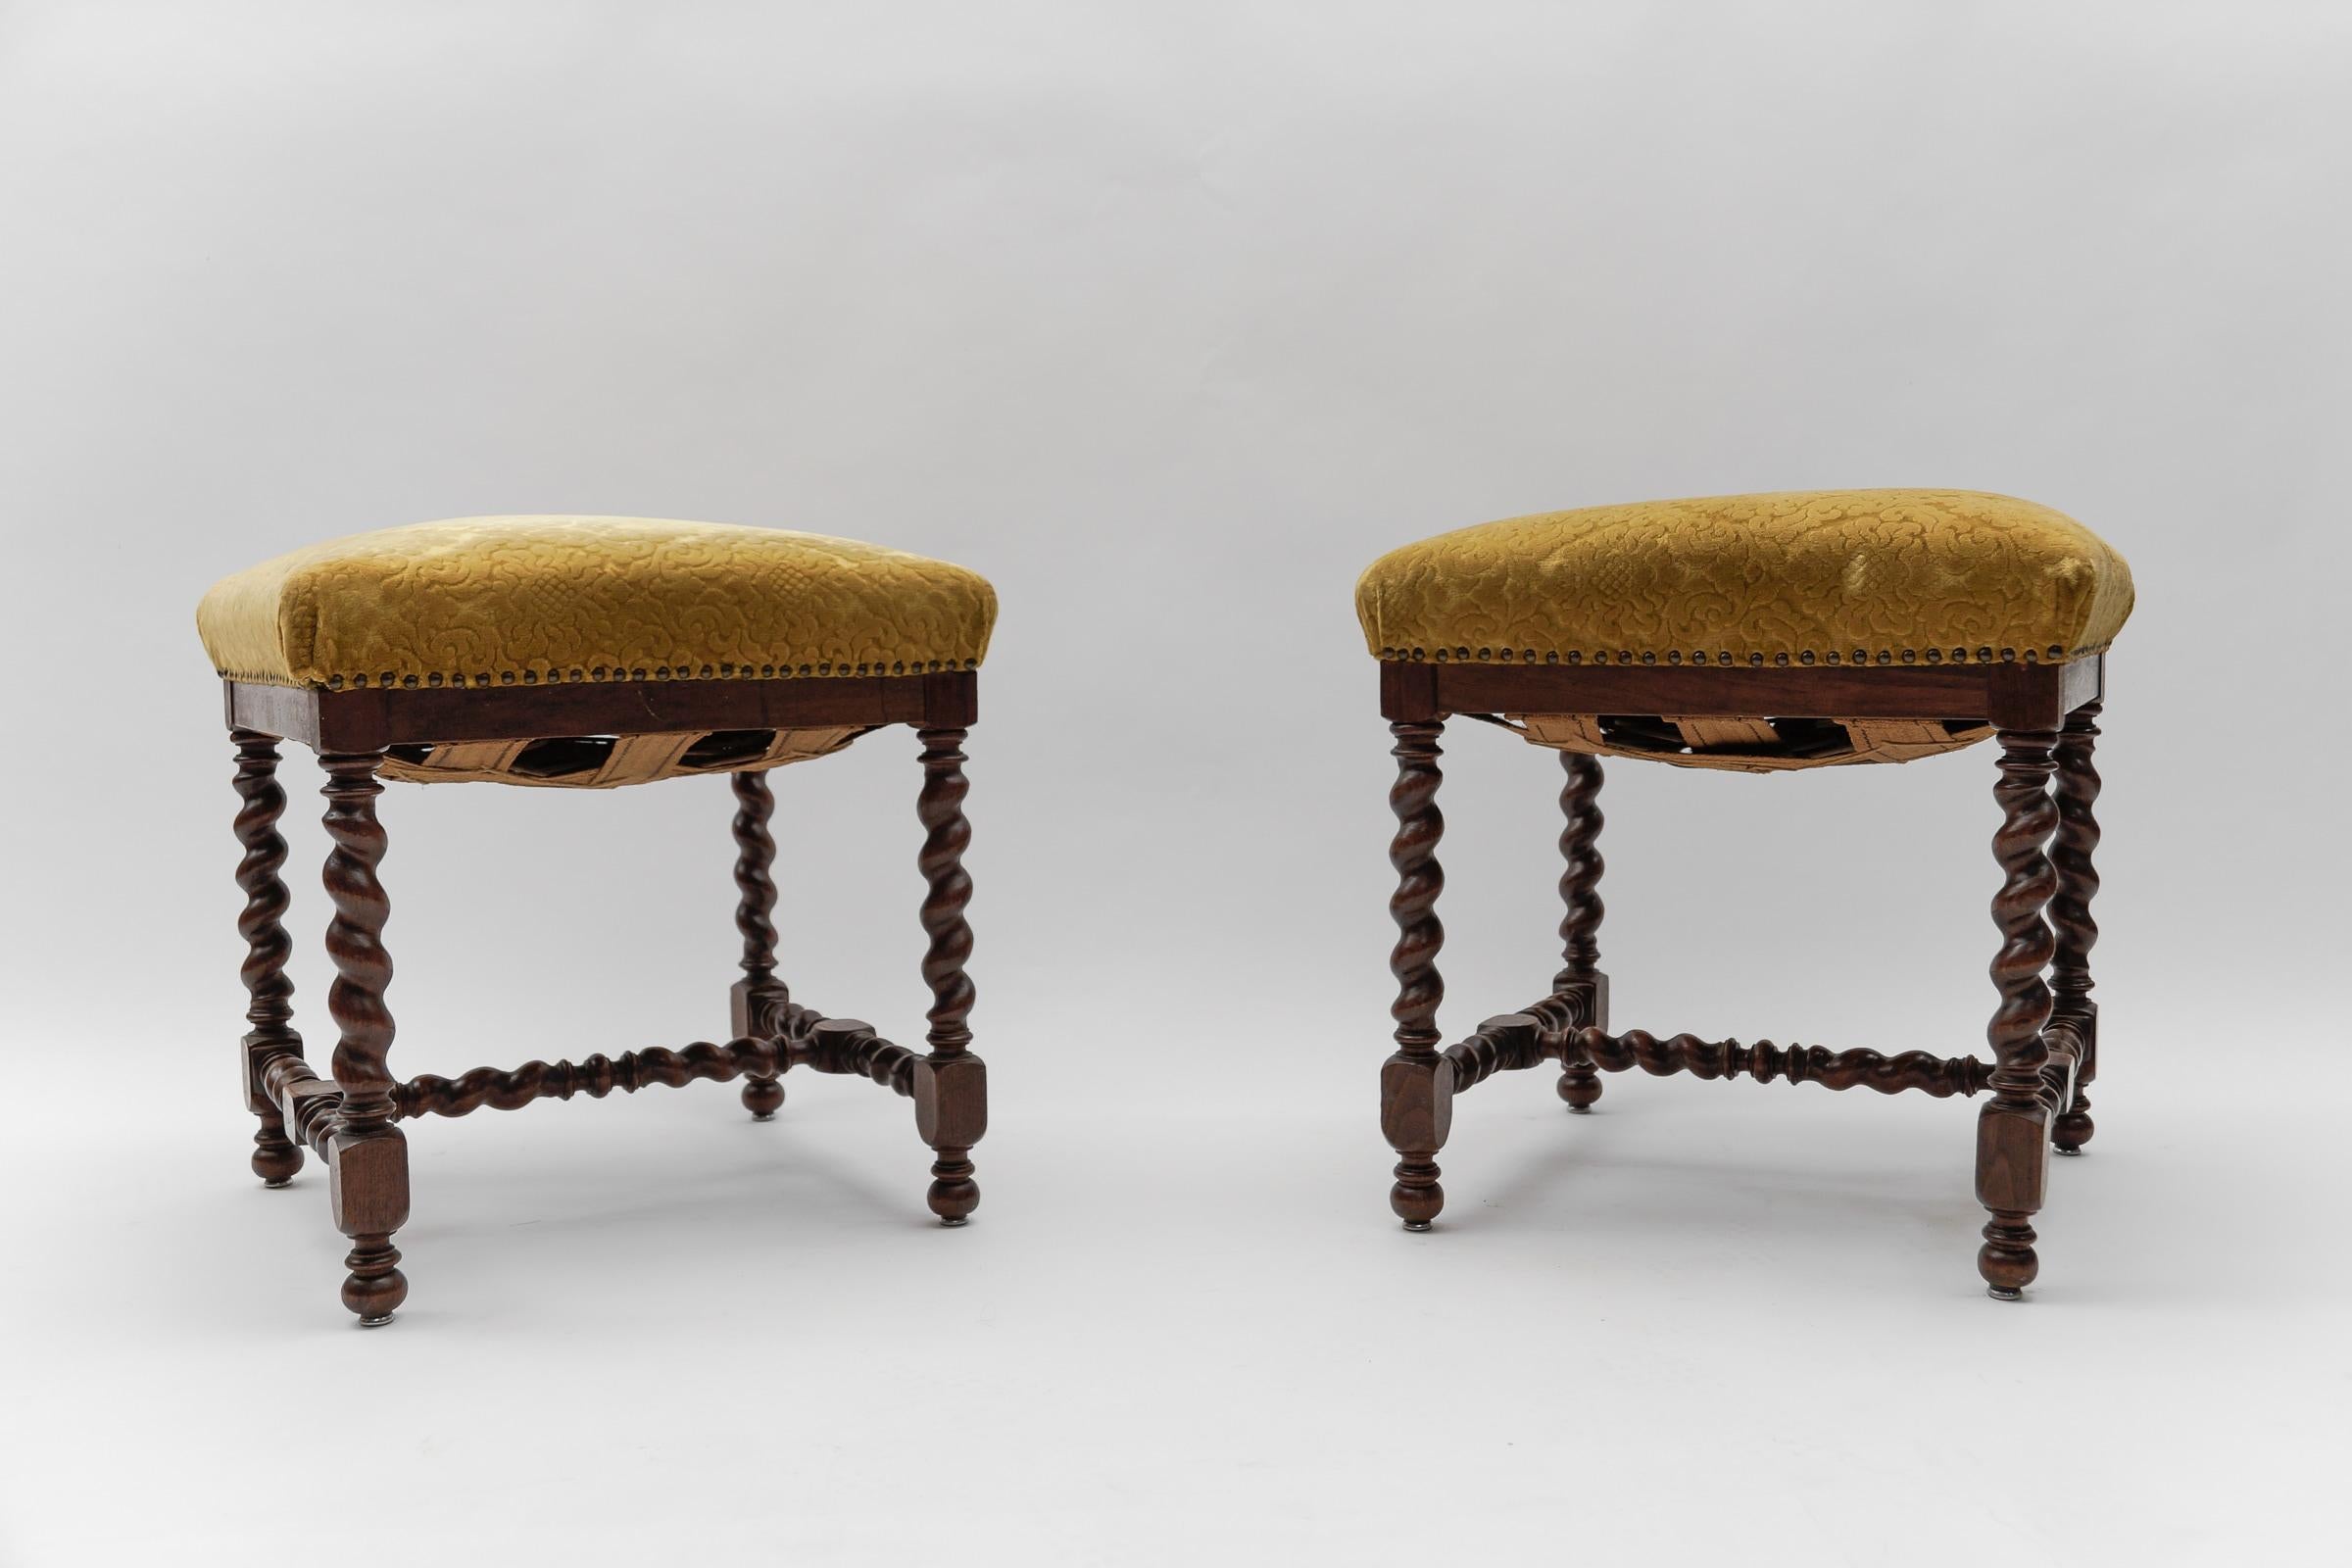 Two French Barley Wood Stools in Louis XIII Style, ca. 1870s

It looks like it is still the original cover. It does have a few slight signs of wear, but it still looks really good.

Very decorative.

We are happy to have received them in a pair.